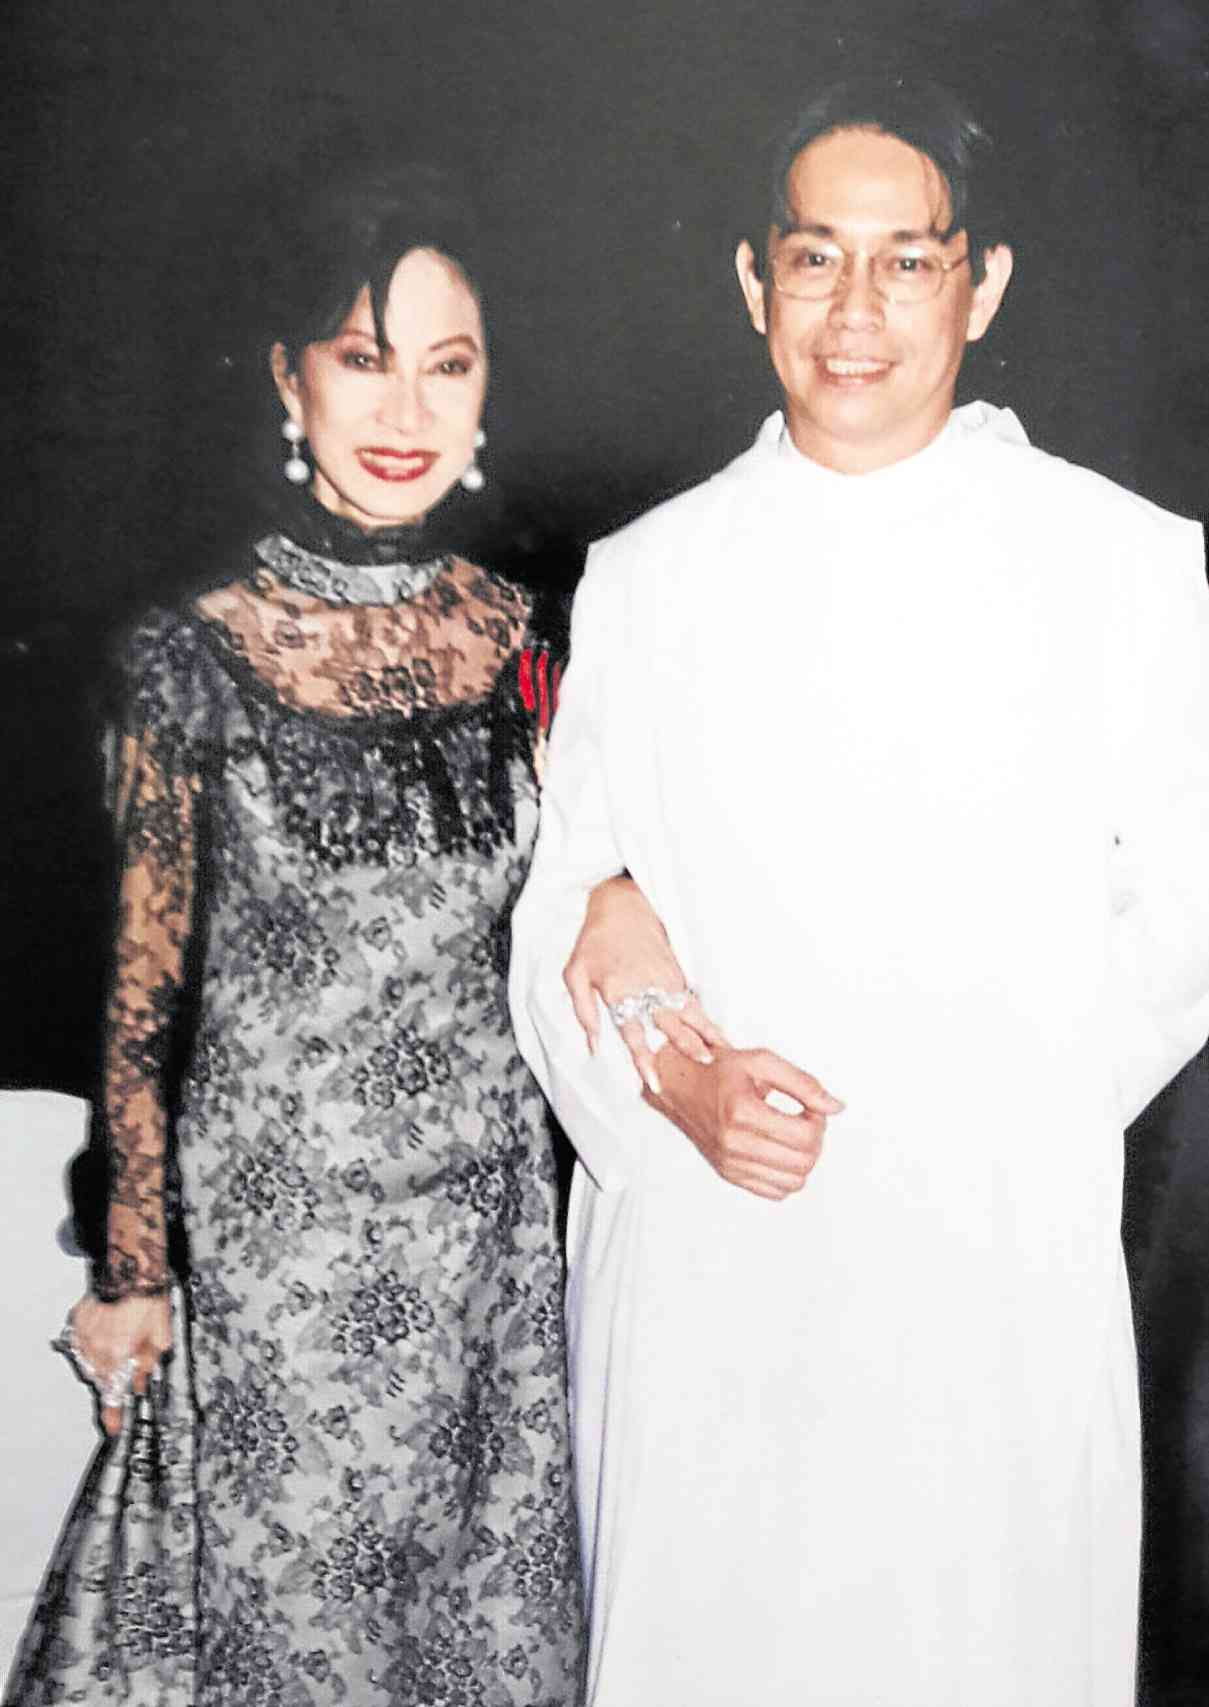 MELDY Cojuangco, with the author, at the Papal Awards Ceremonies where she received the Golden Medal of the Order of St. Sylvester